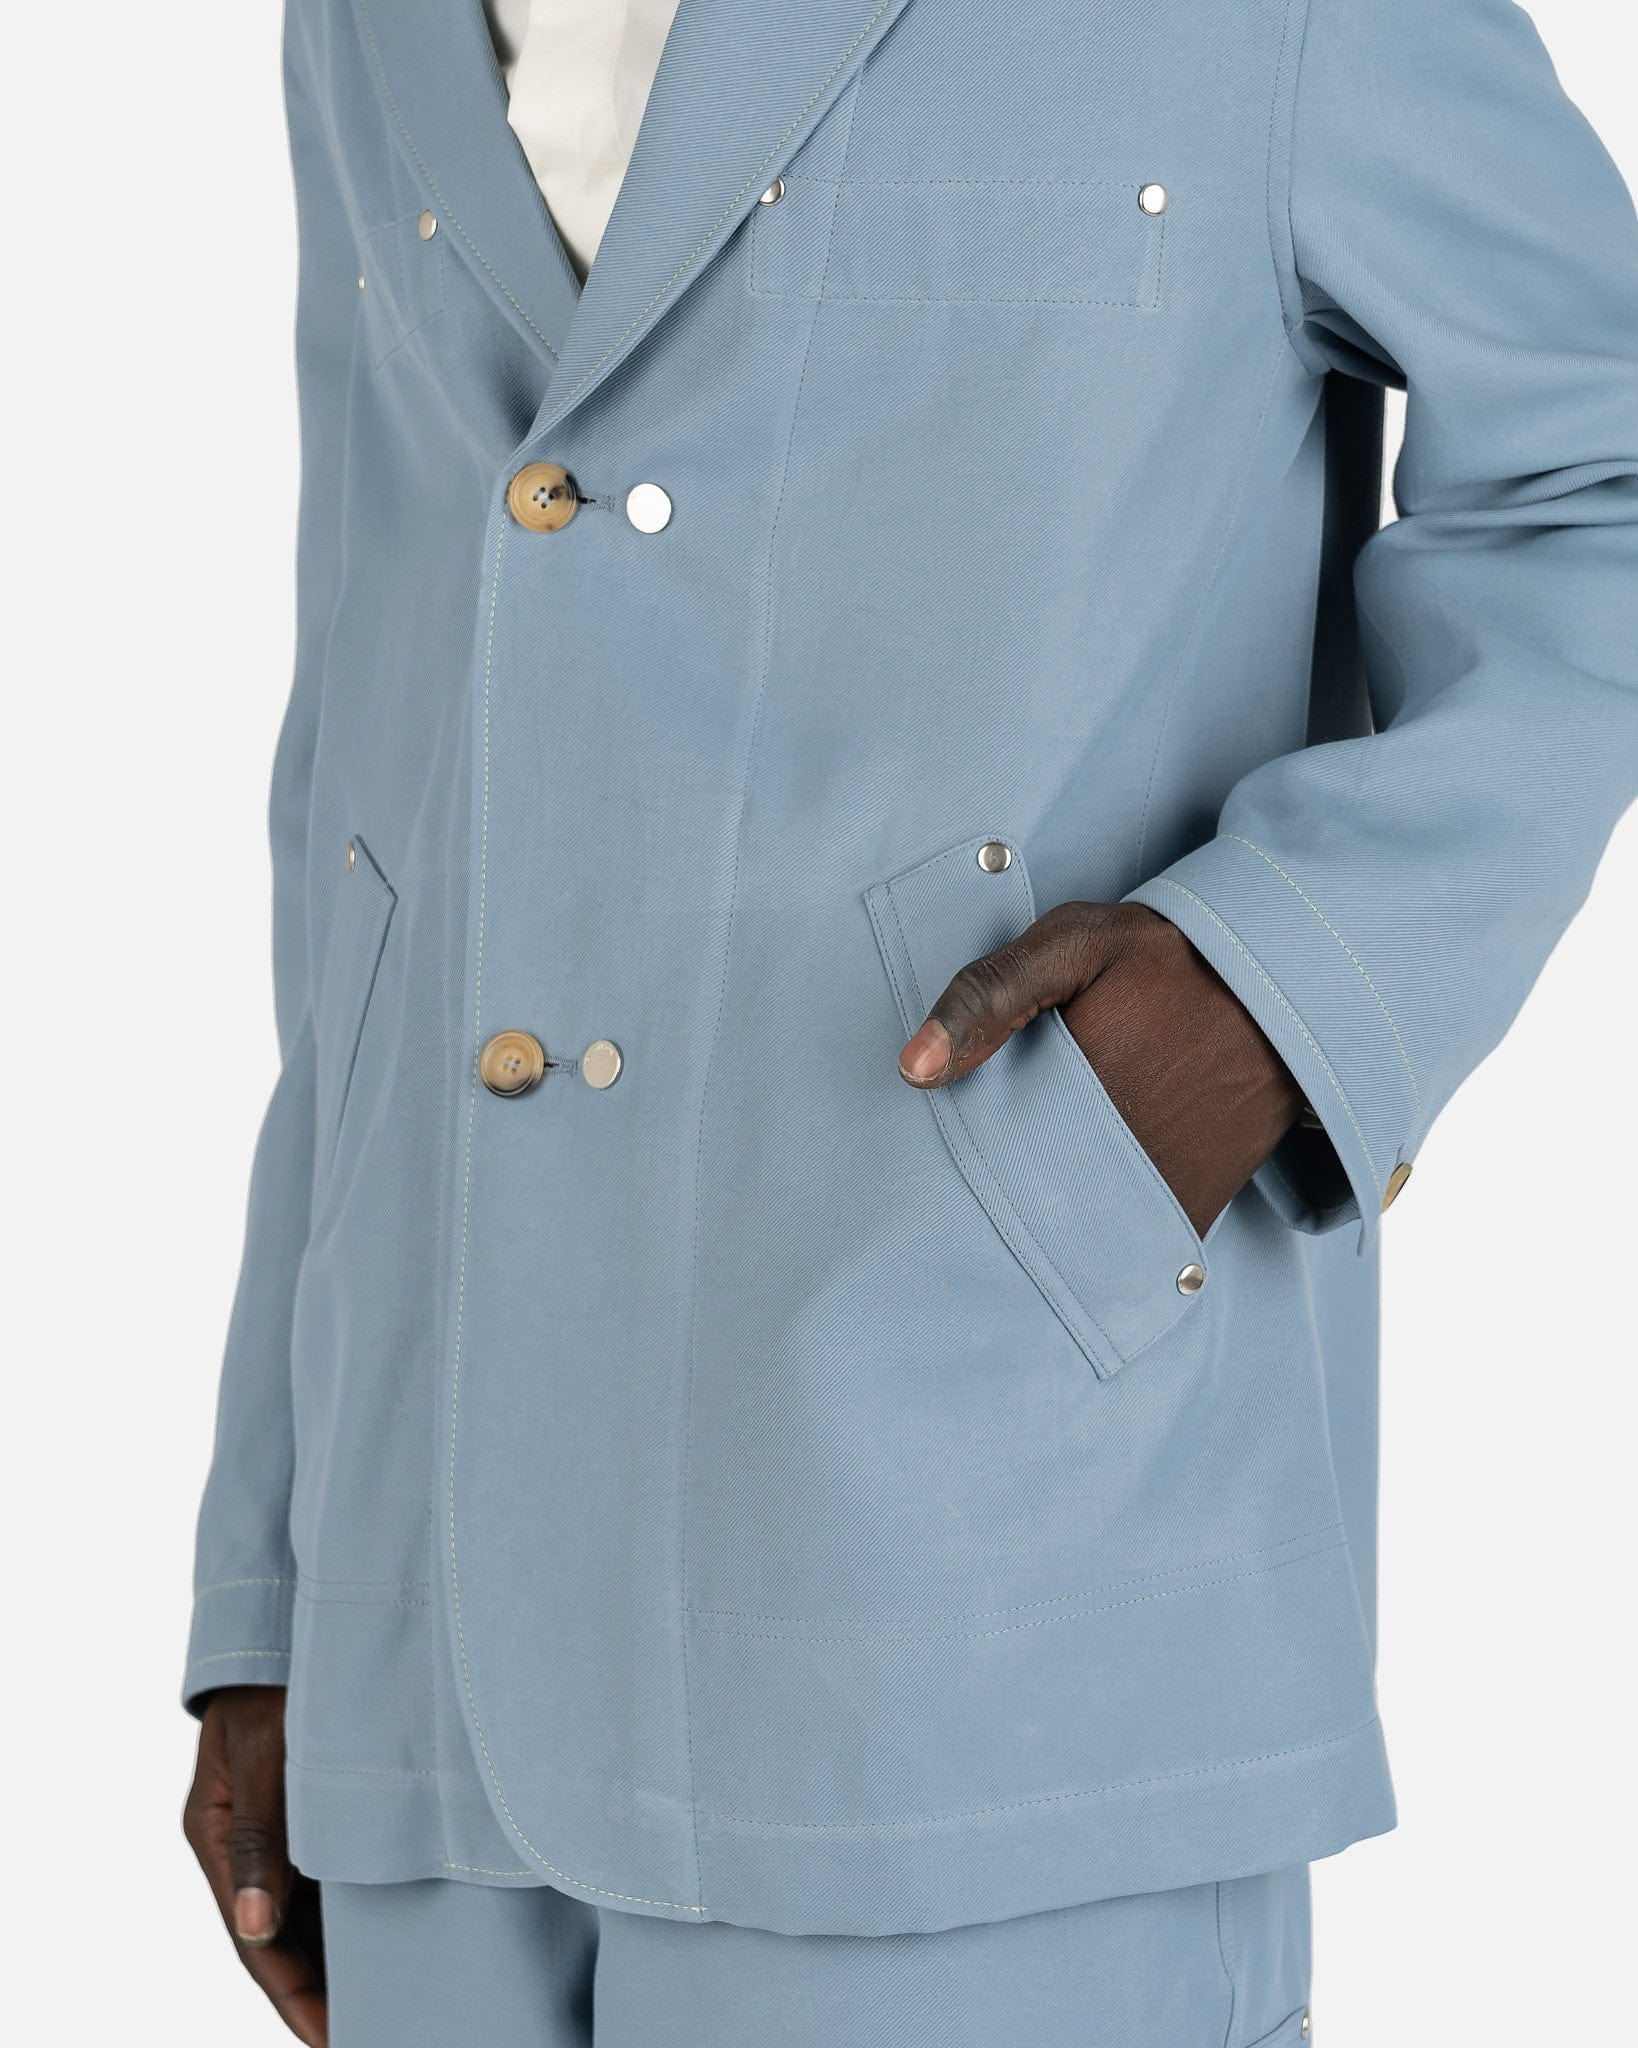 JW Anderson Men's Jackets Relaxed Workwear Jacket in Airforce Blue